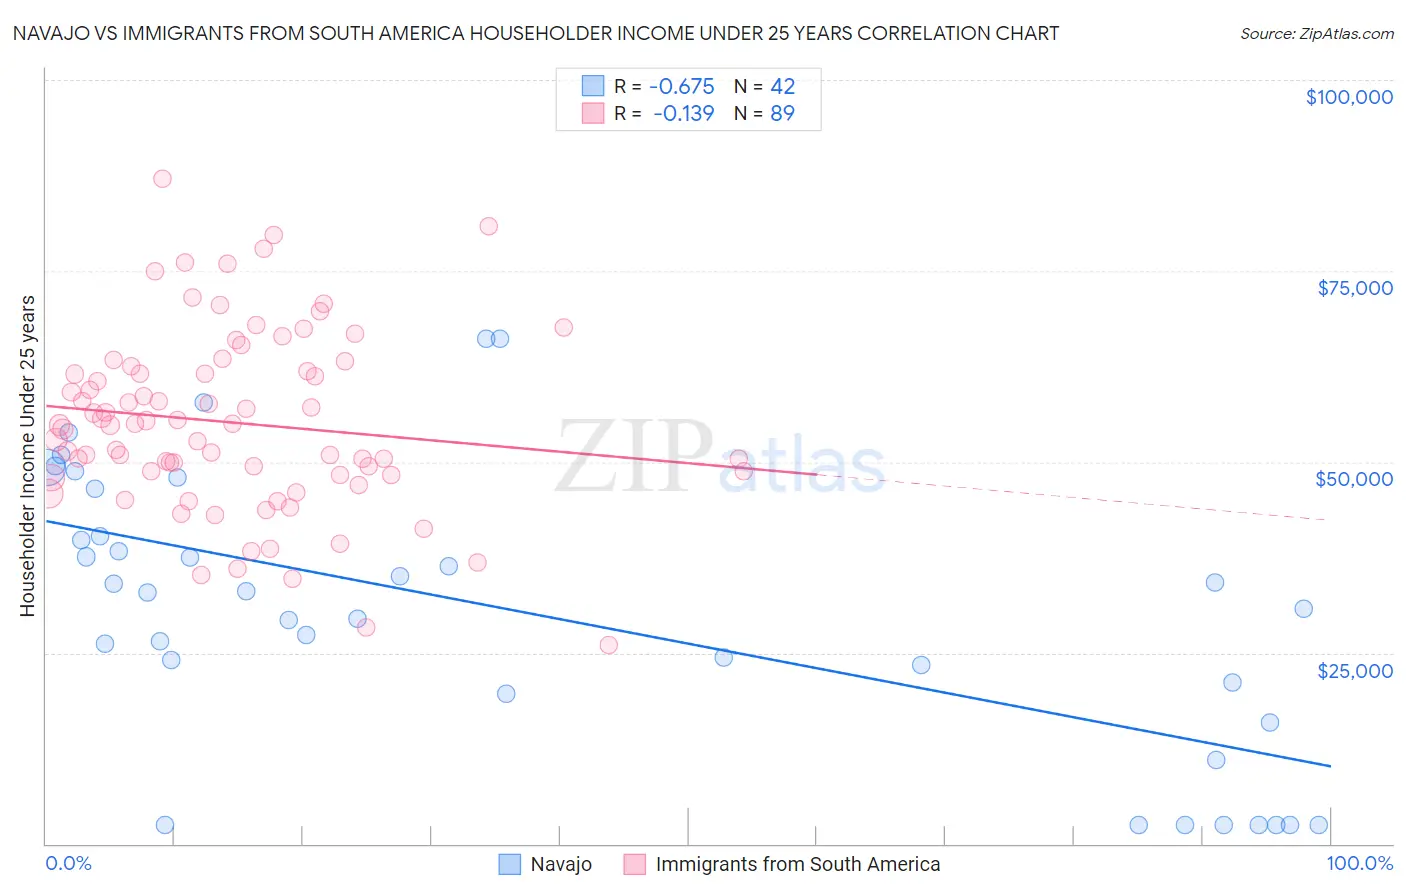 Navajo vs Immigrants from South America Householder Income Under 25 years